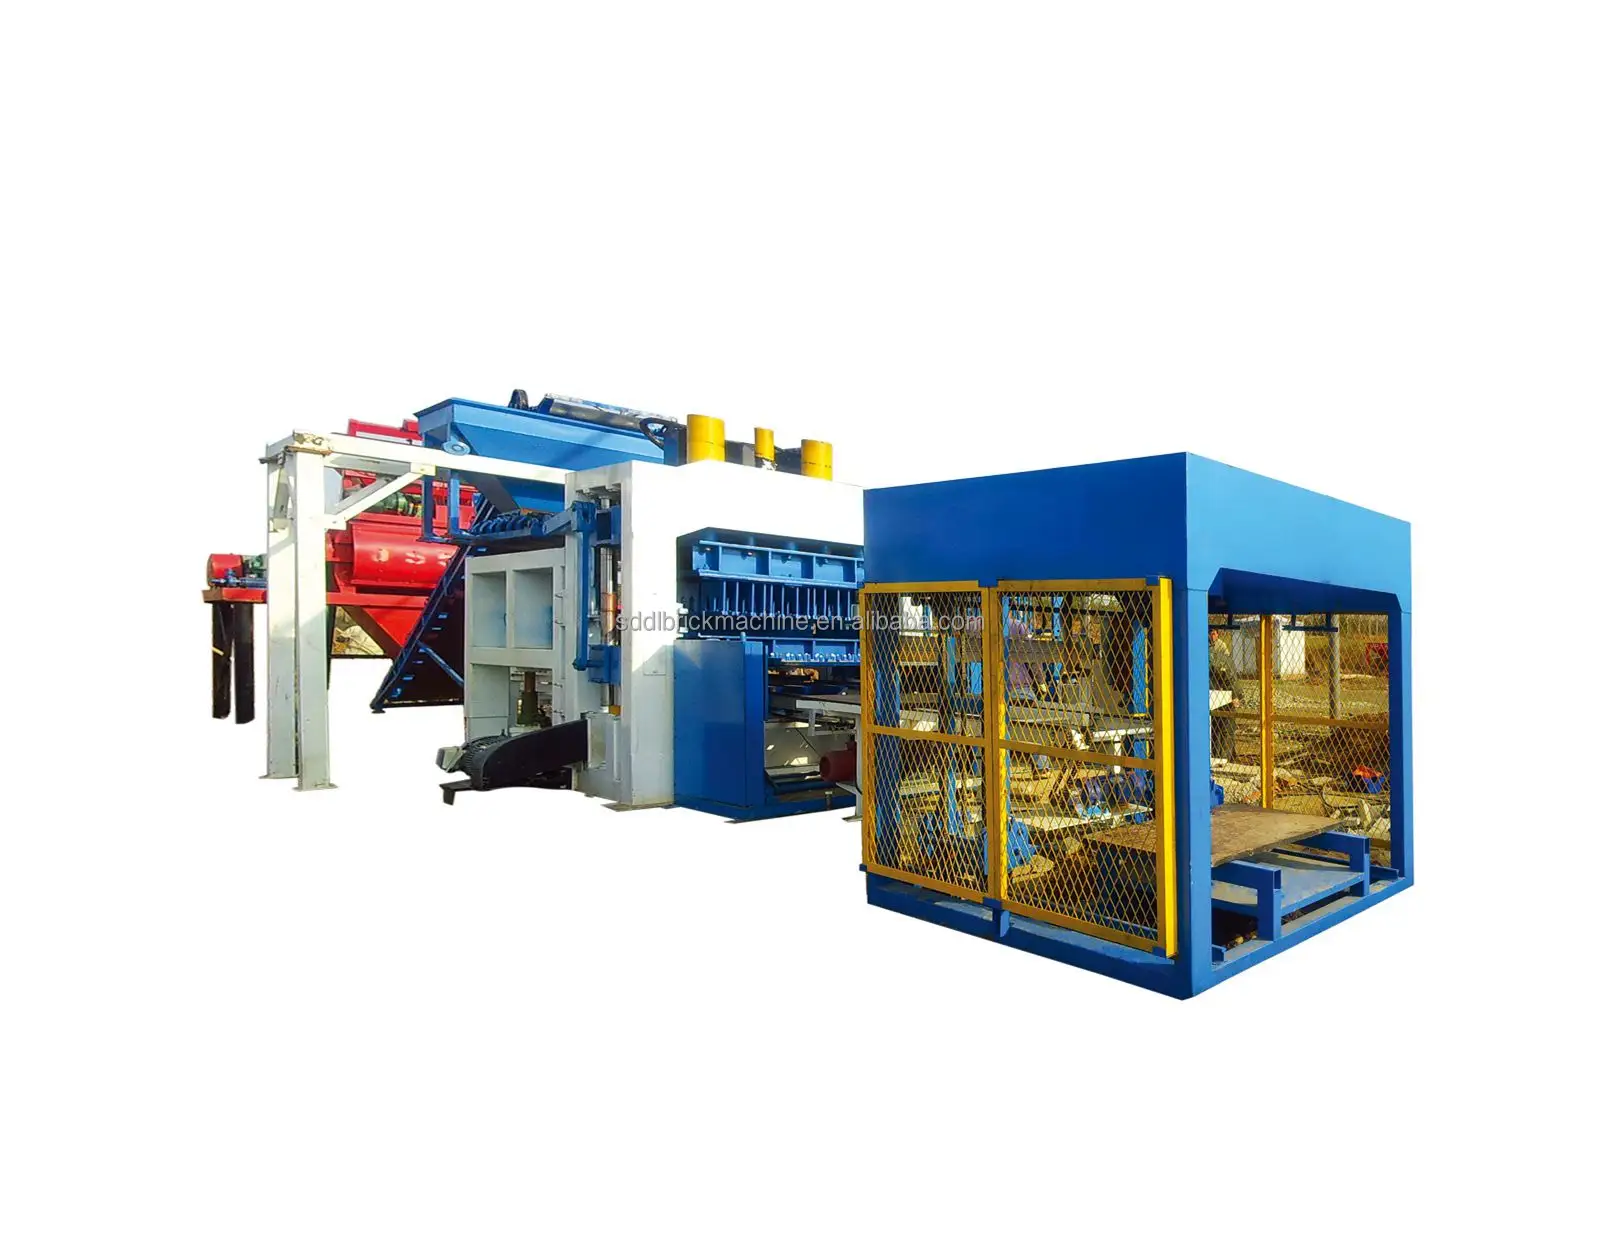 Factory price DL-1000-E manual concrete block machine for sale High capacity fully automatic cement block moulding machine